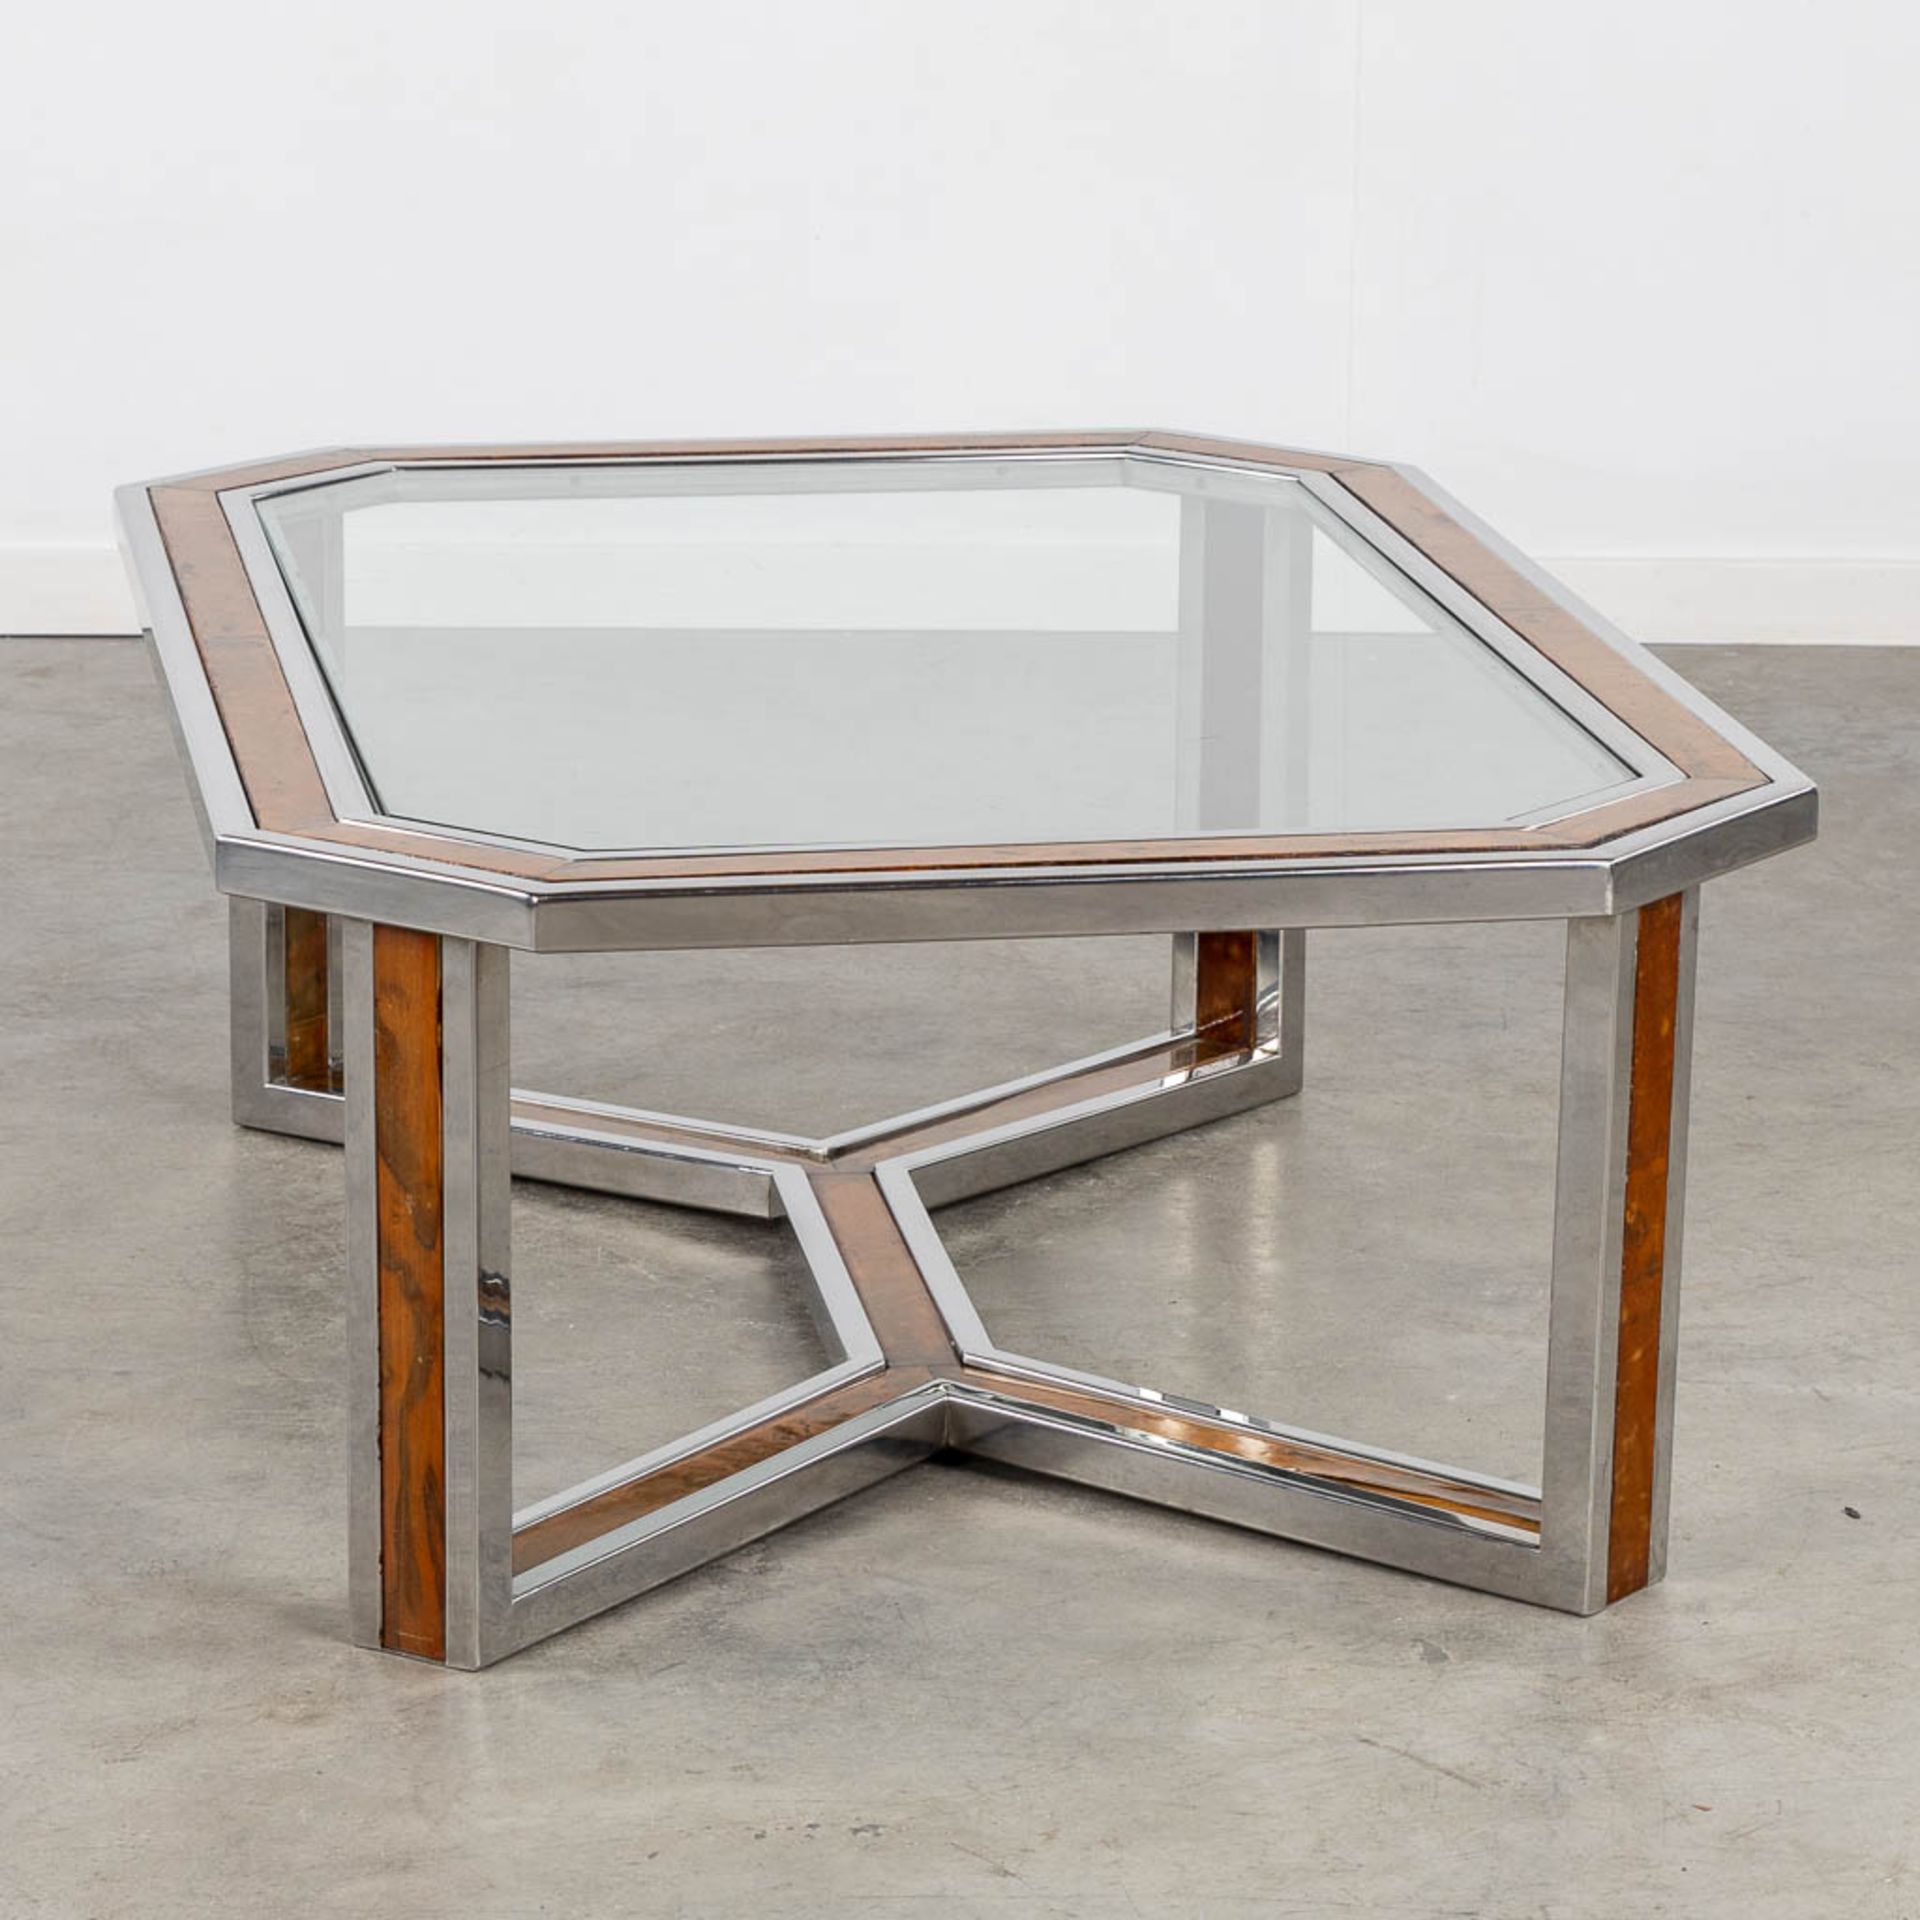 A coffee table, chrome with a faux wood inlay and a glass top. (L:80 x W:120 x H:40 cm) - Image 6 of 10